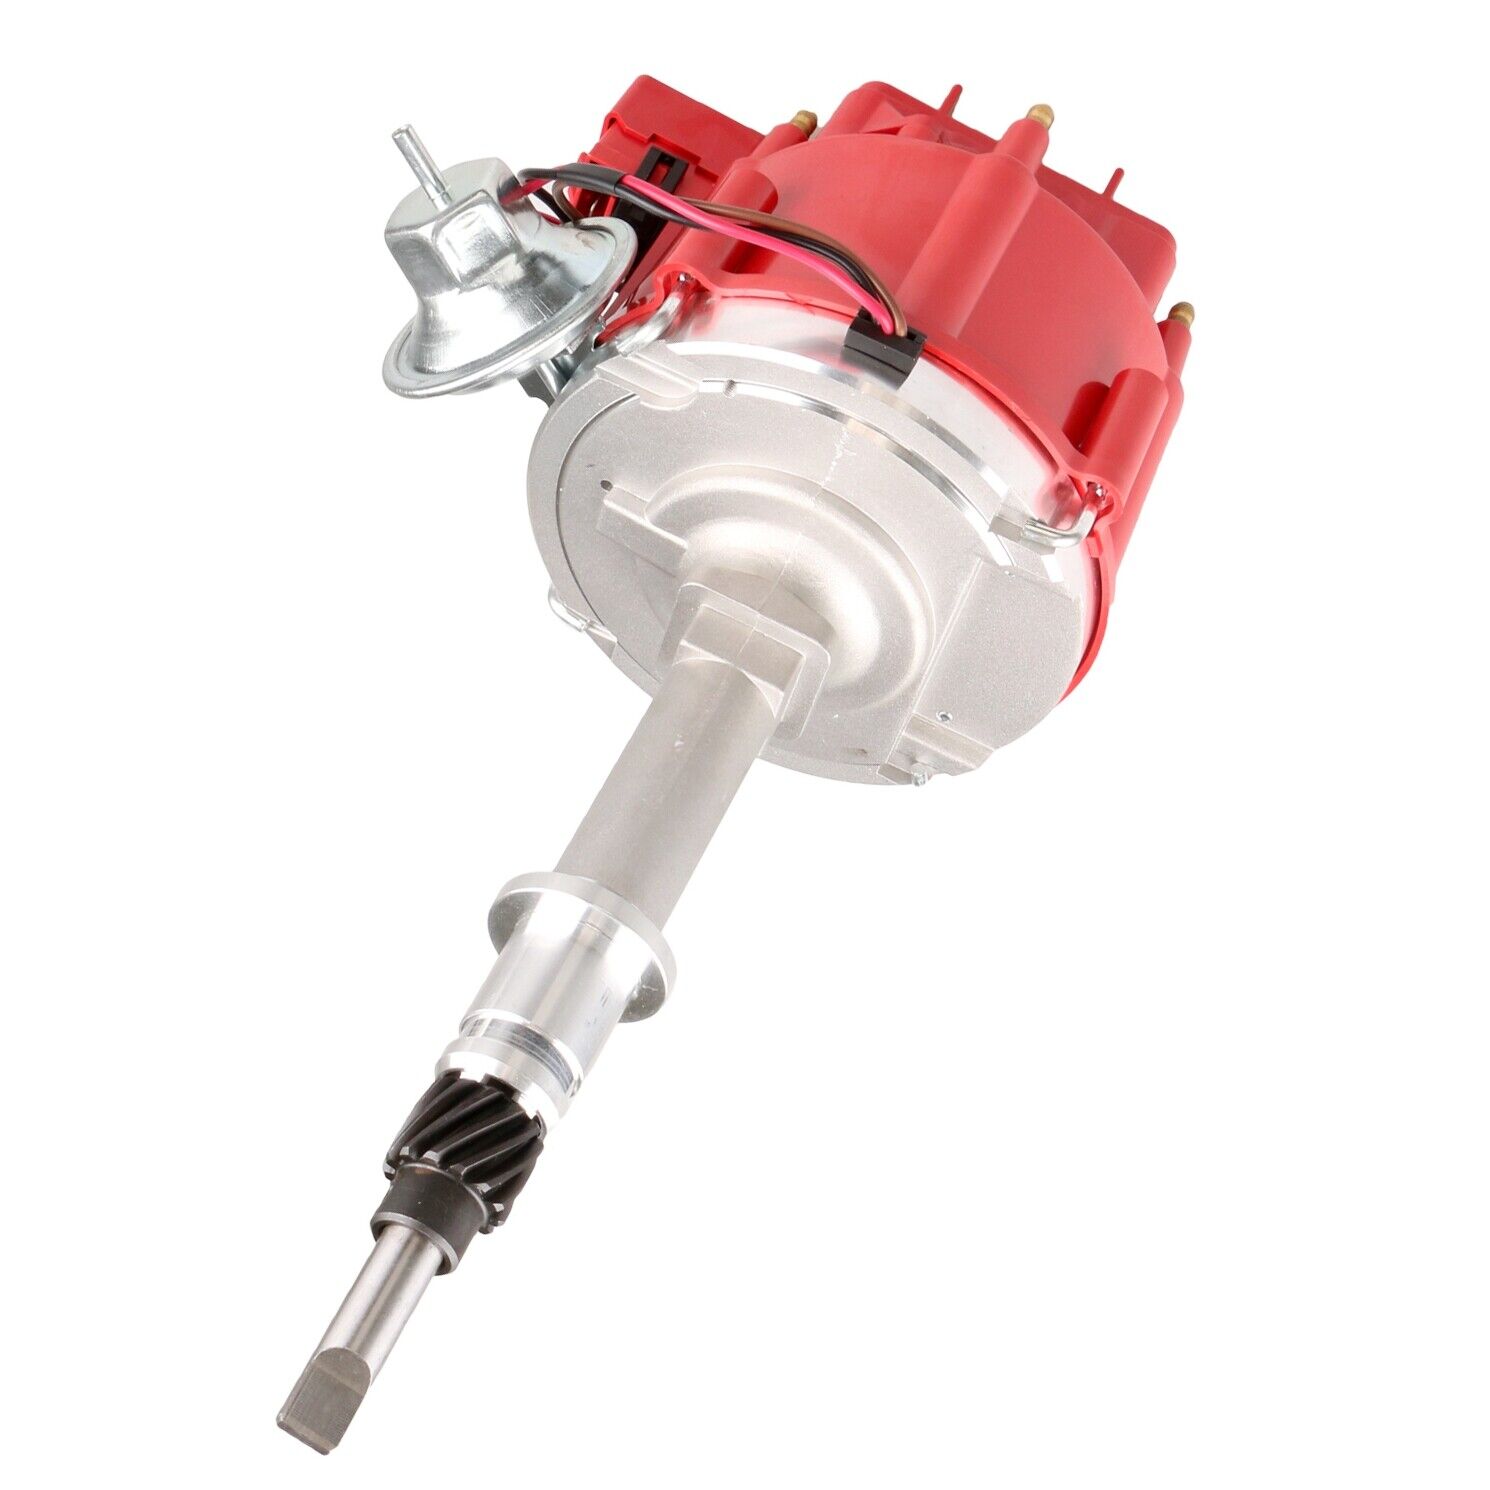 Red Cap Ignition Distributor For 1956-1990 AMC/JEEP INLINE 6 232&258  6 CYLINDER